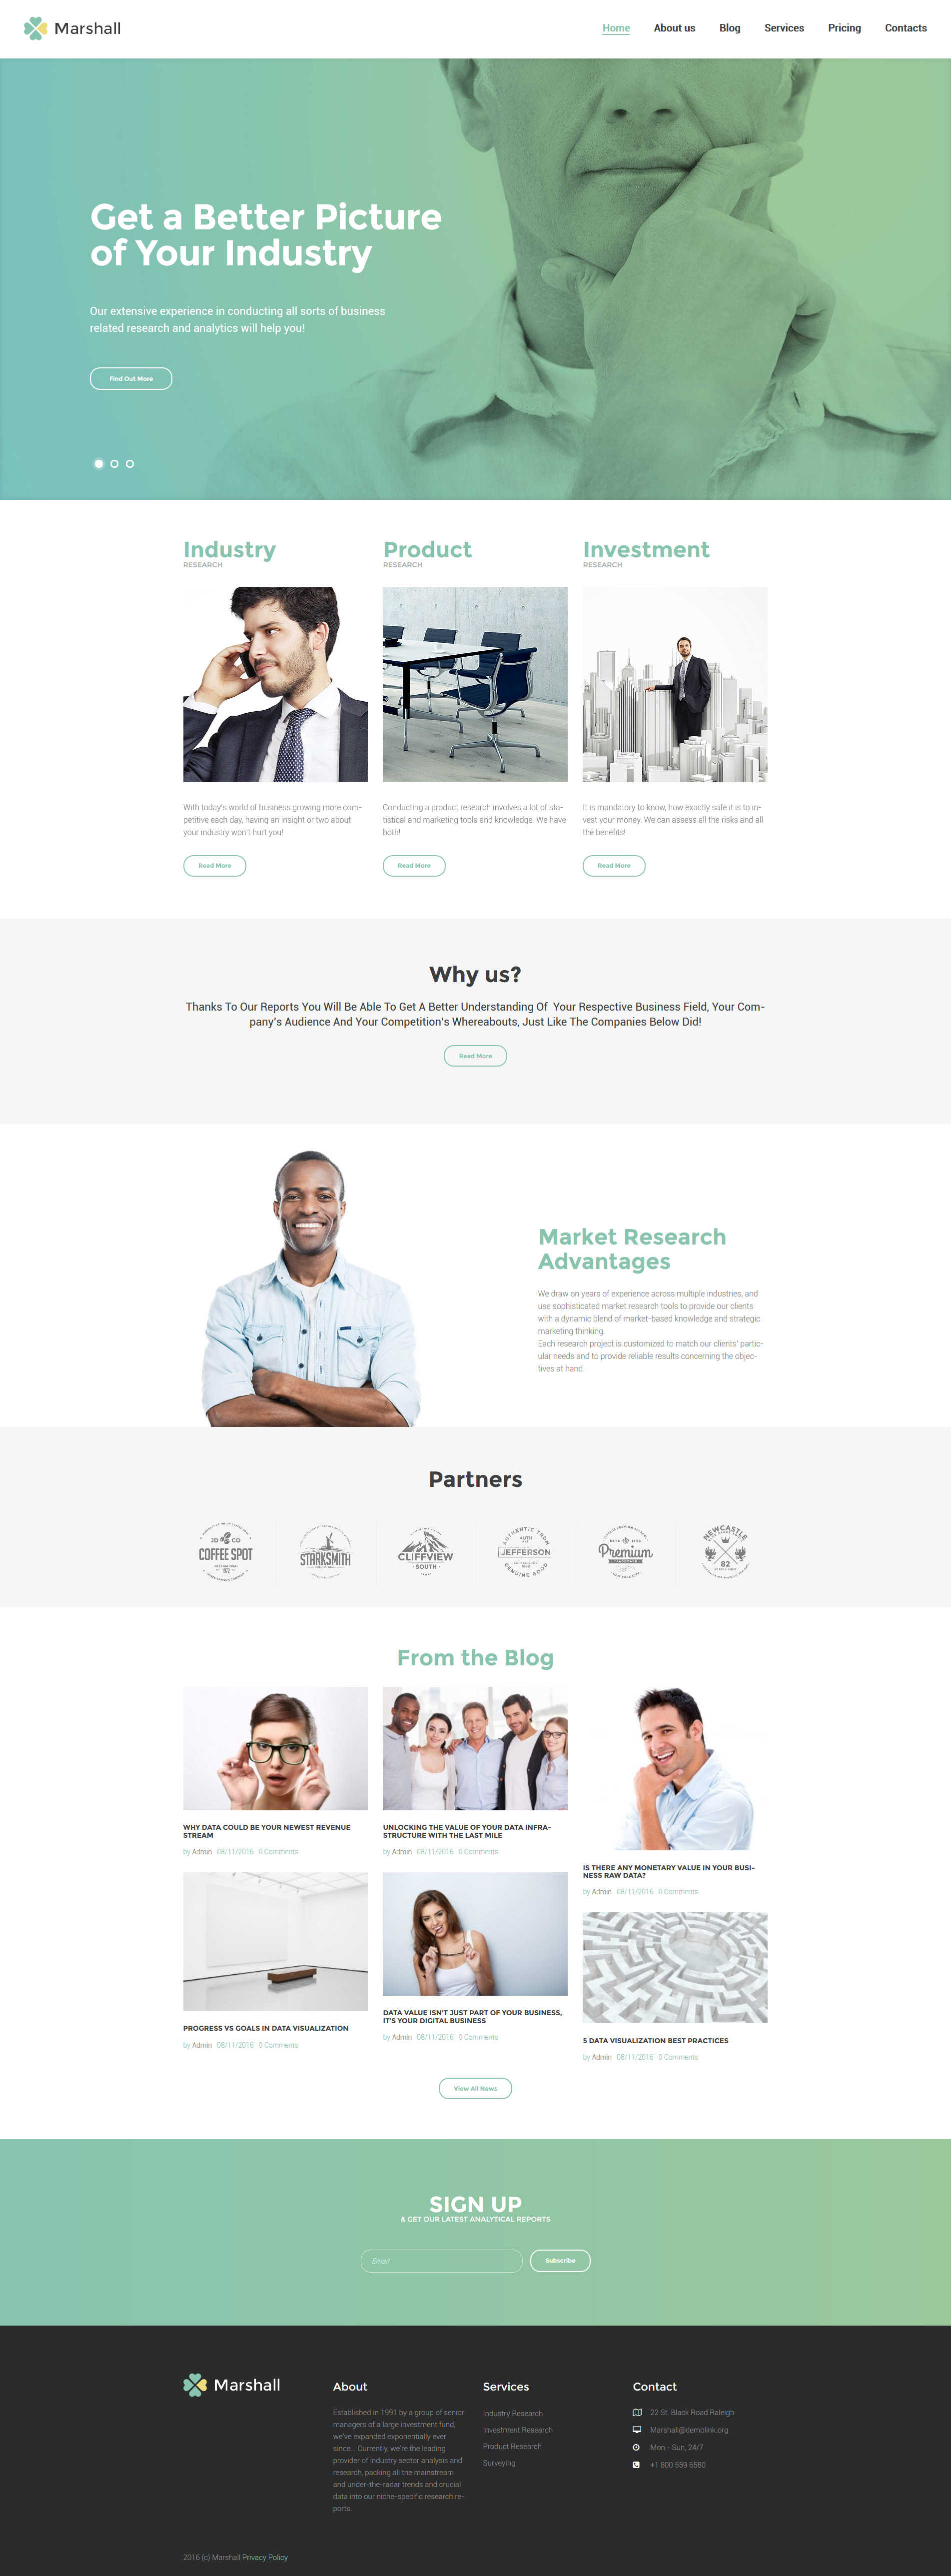 Marshall - Business Analysis and Market Research Agency WordPress Theme